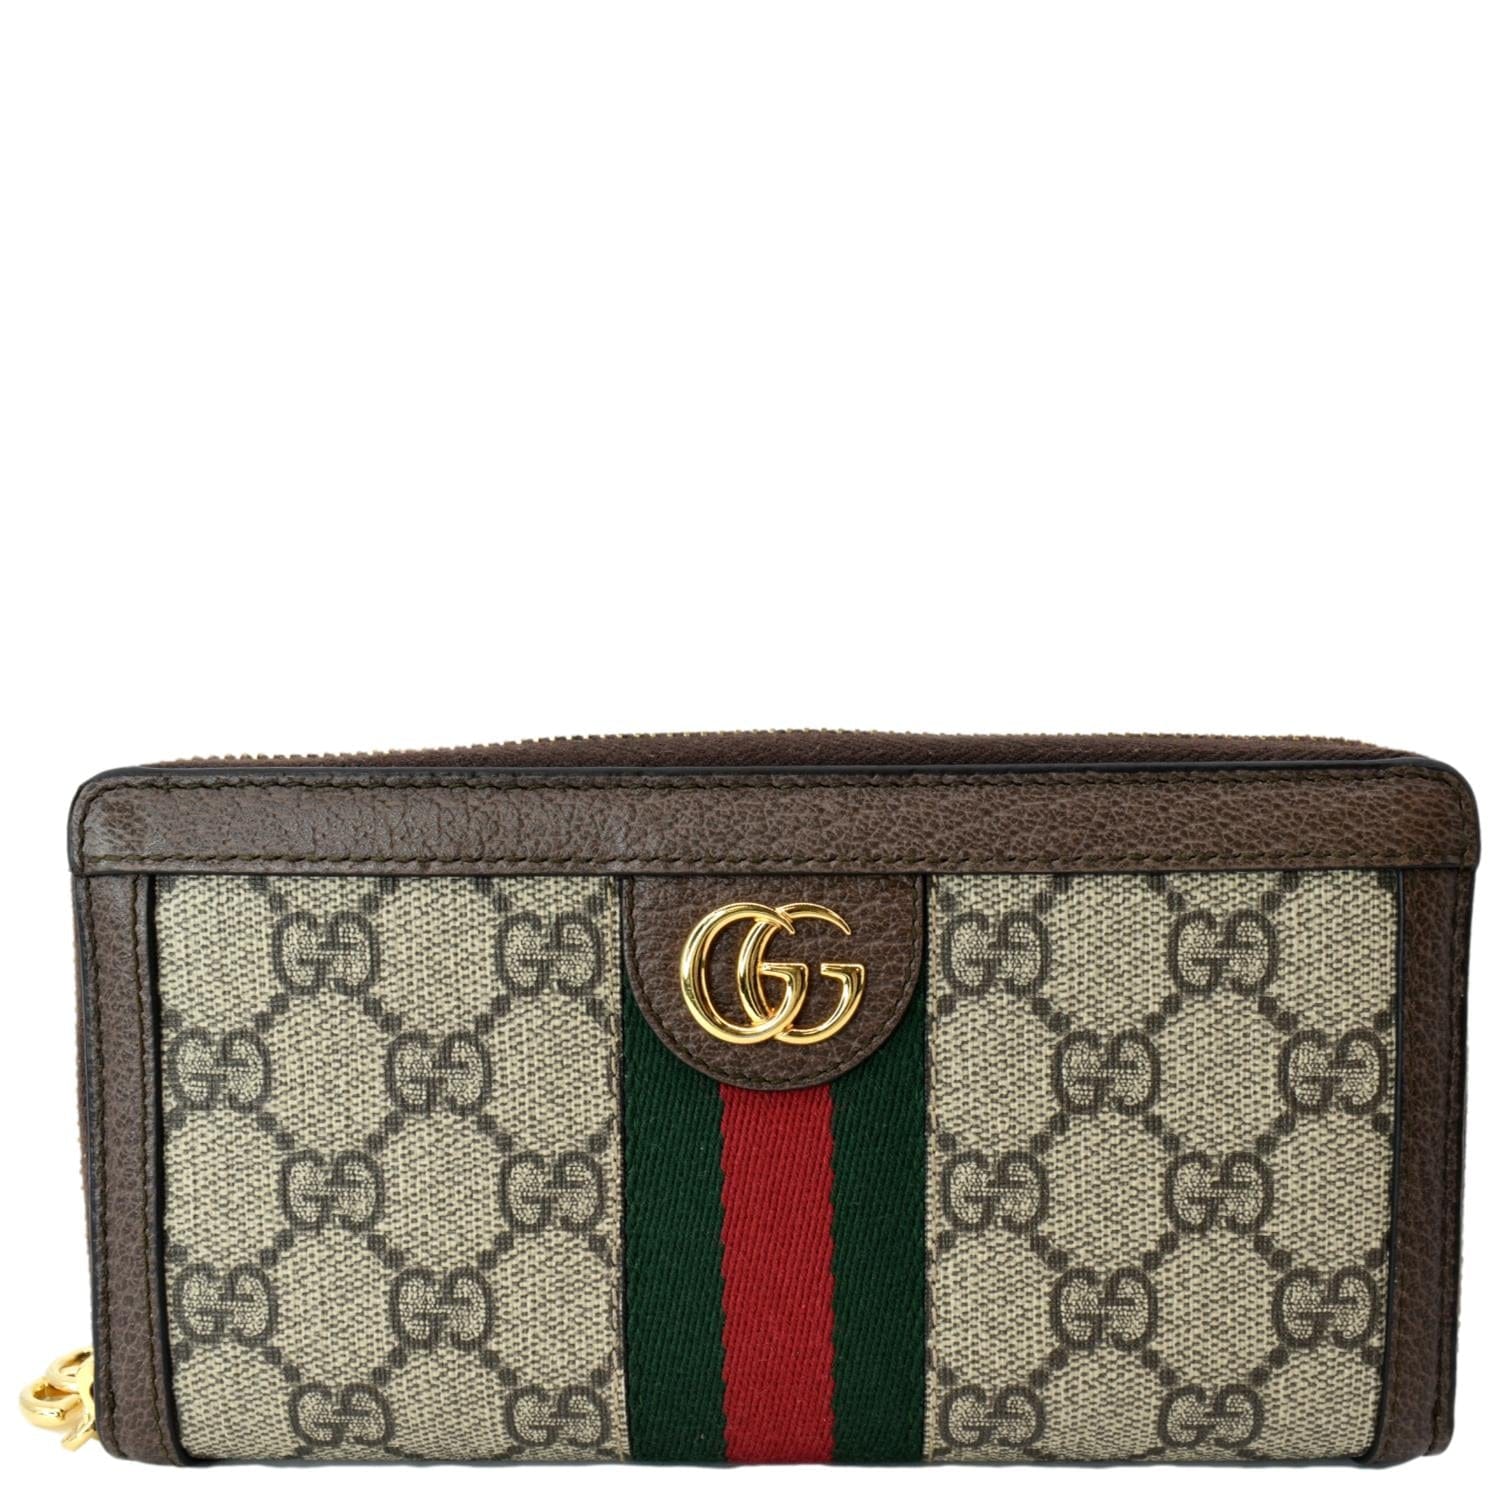 💯% Authentic Gucci Bag with matching long wallet